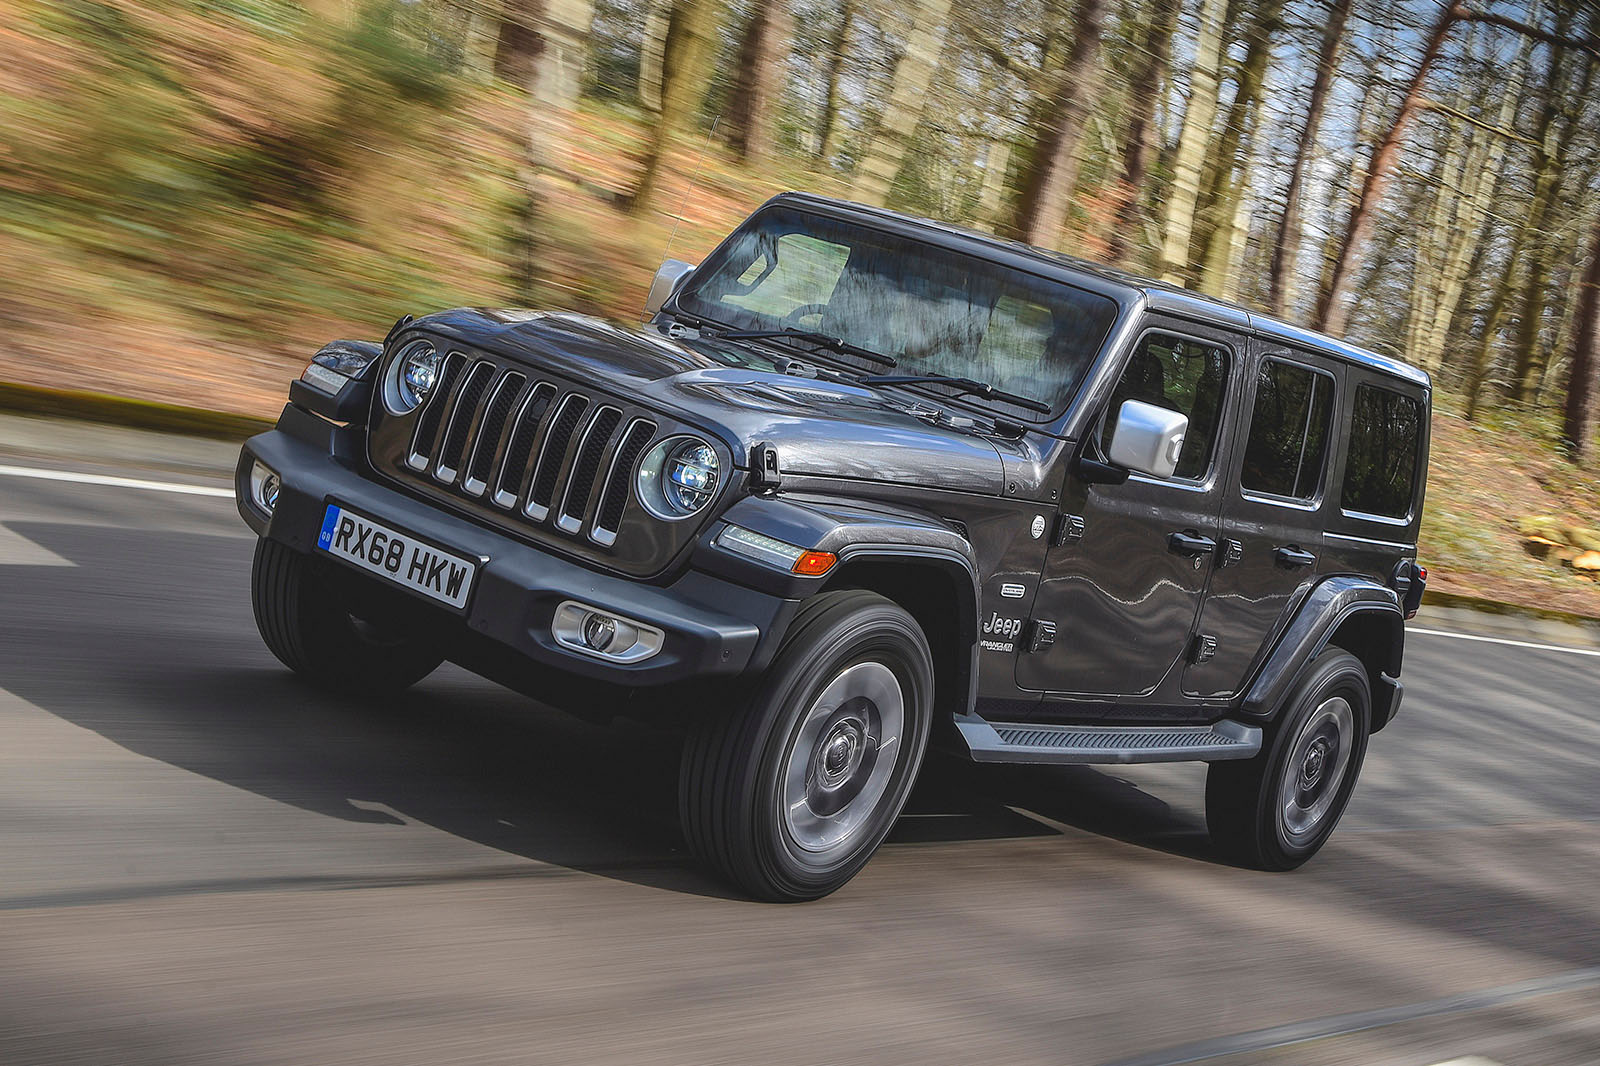 Jeep Wrangler Can Make It in the Modern World